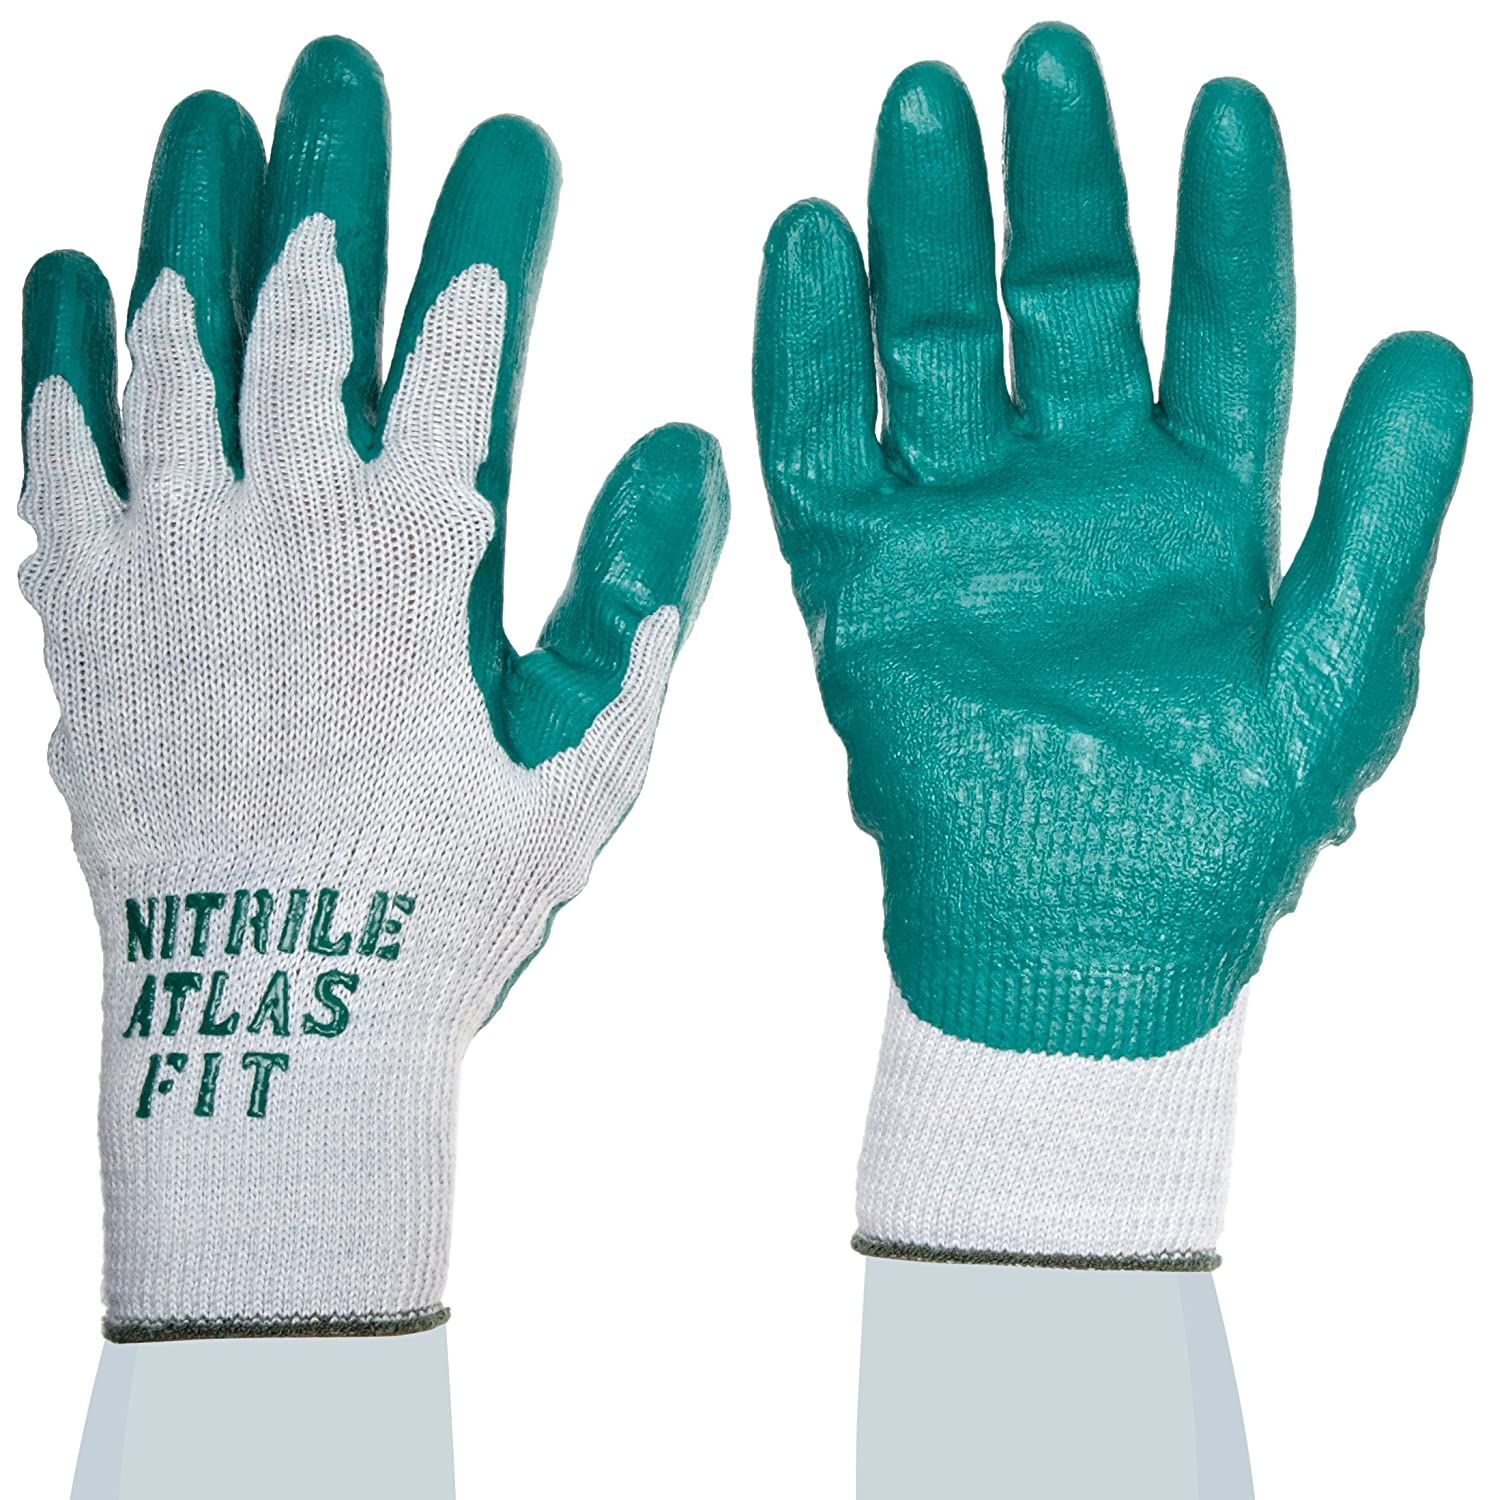 Nitrile palm coating,  Hi vis yellow/green coating, 10 gauge seamless cut resistant liner made with polyester/stainless steel, Hagane Coil™ Technology, small, ANSI CUT LEVEL A4